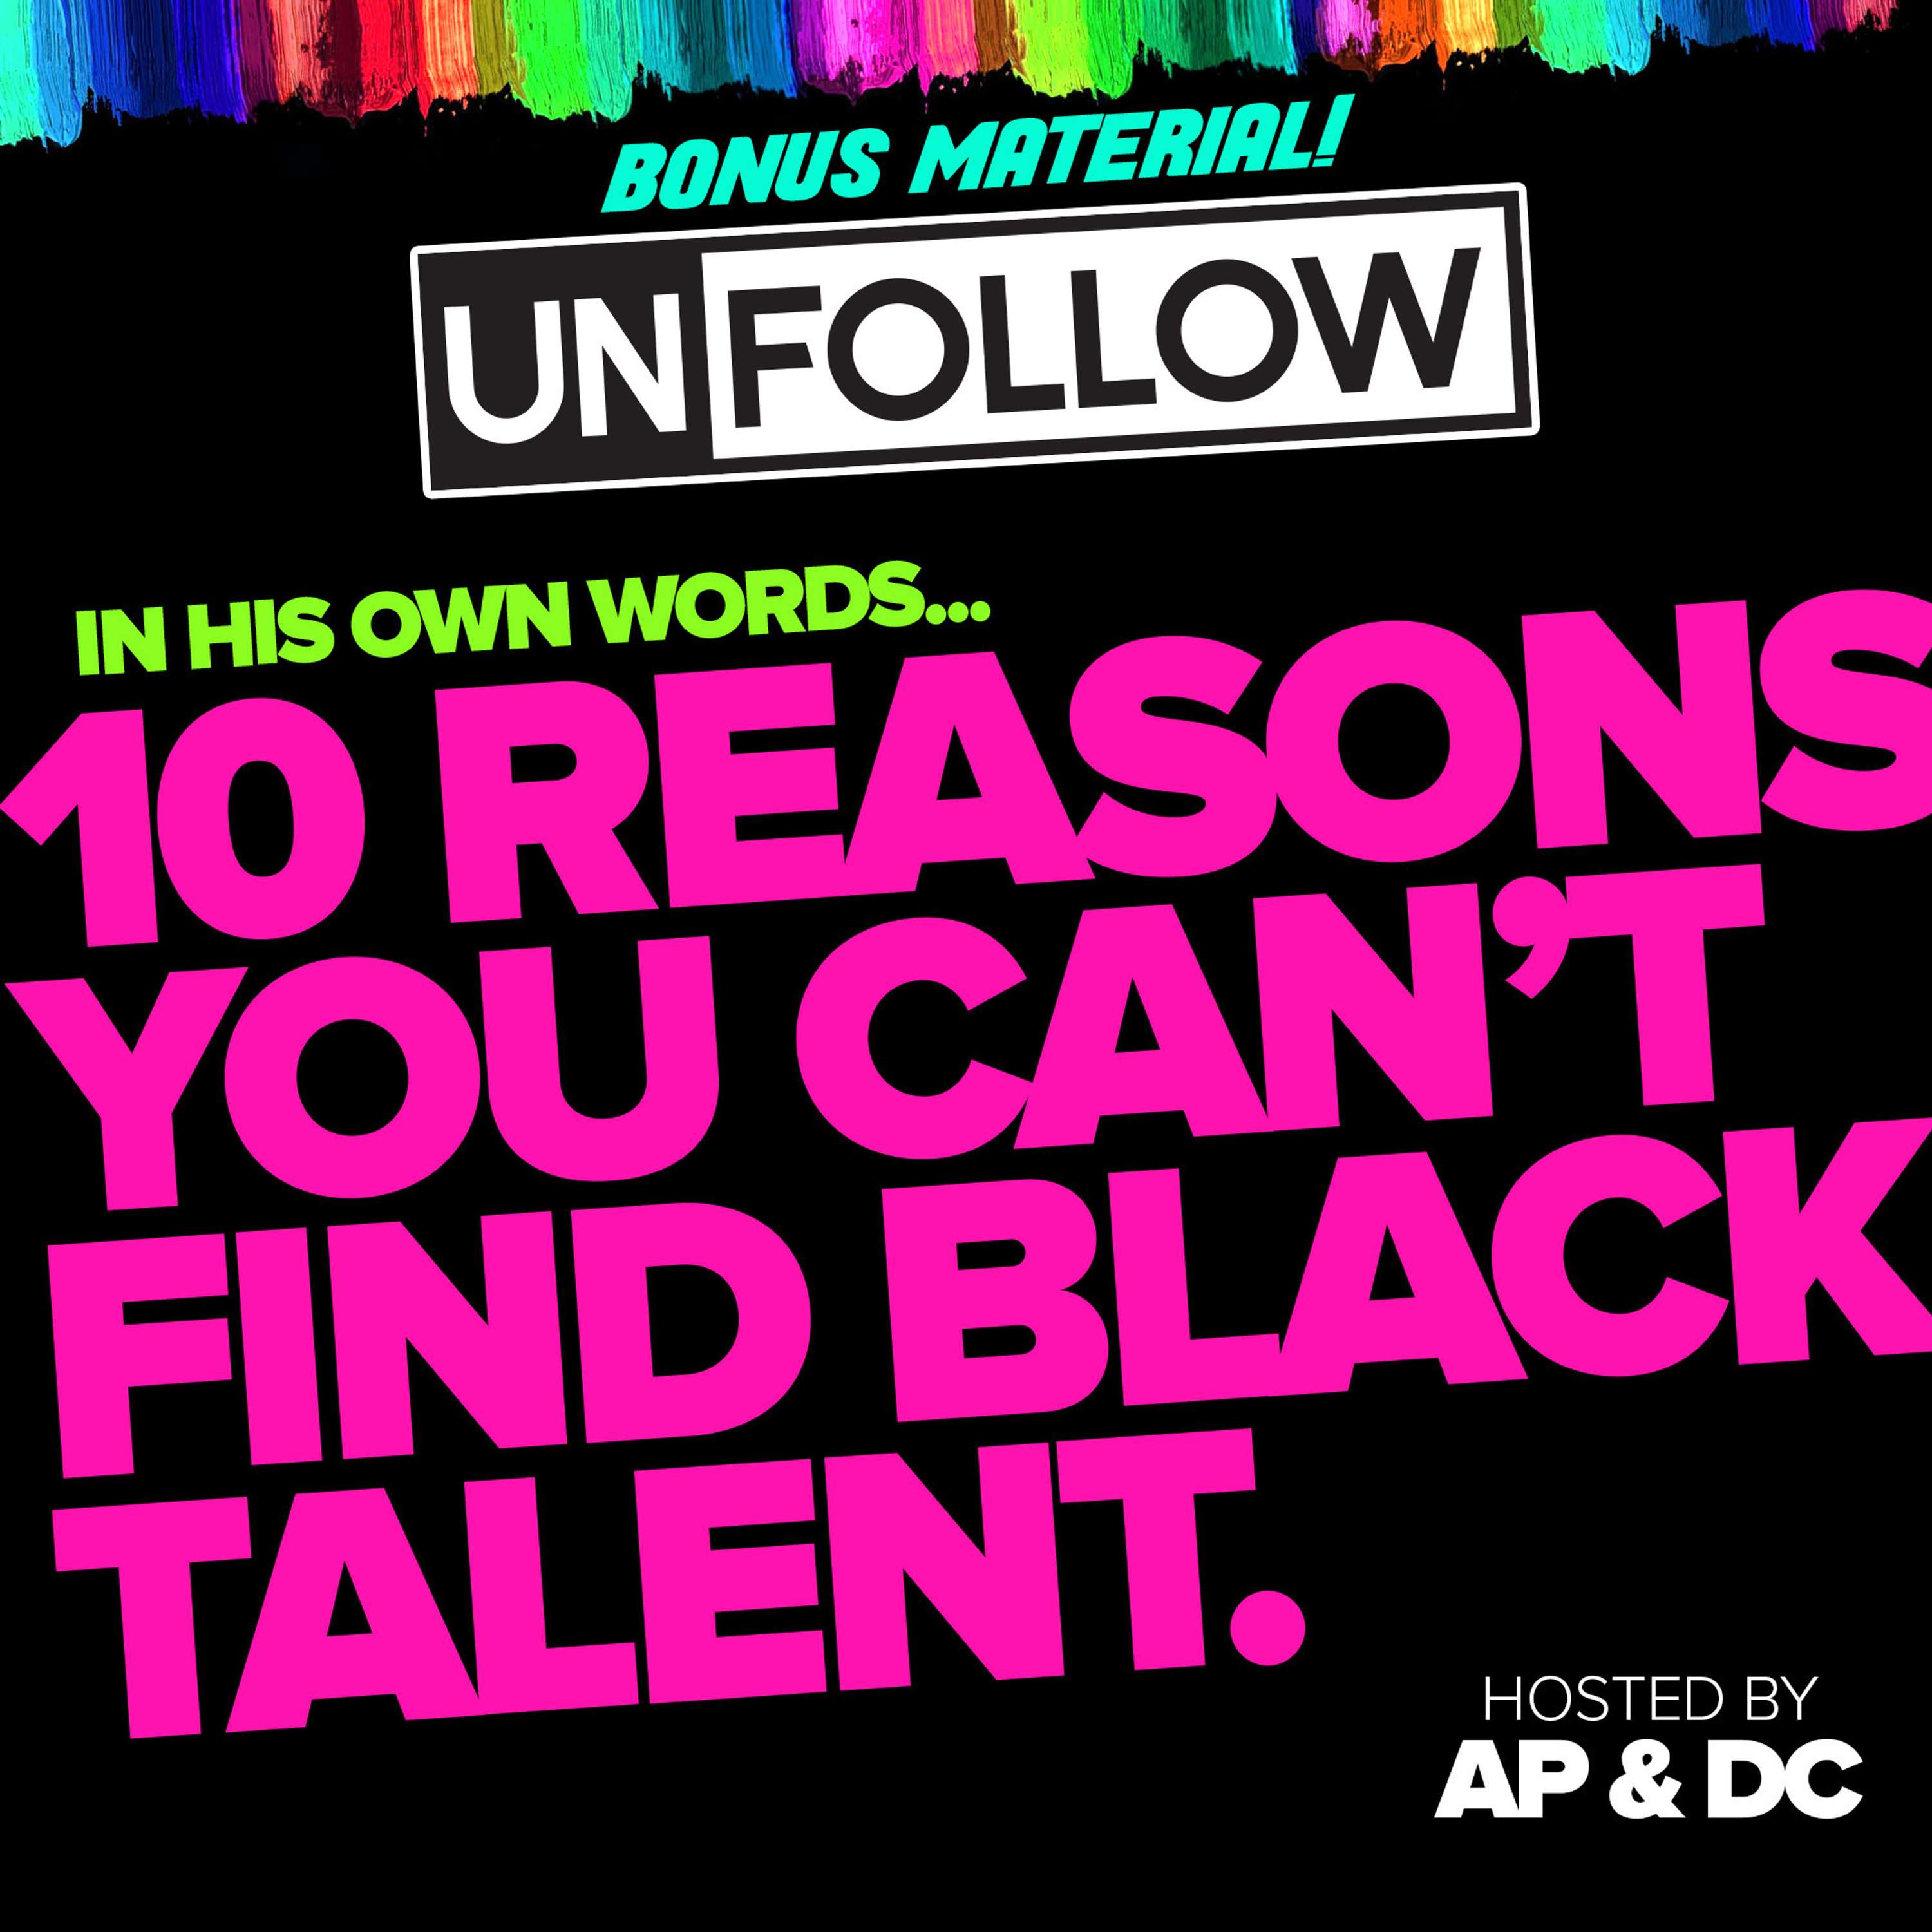 10 Reasons You Can’t Find Black Talent - In His Own Words